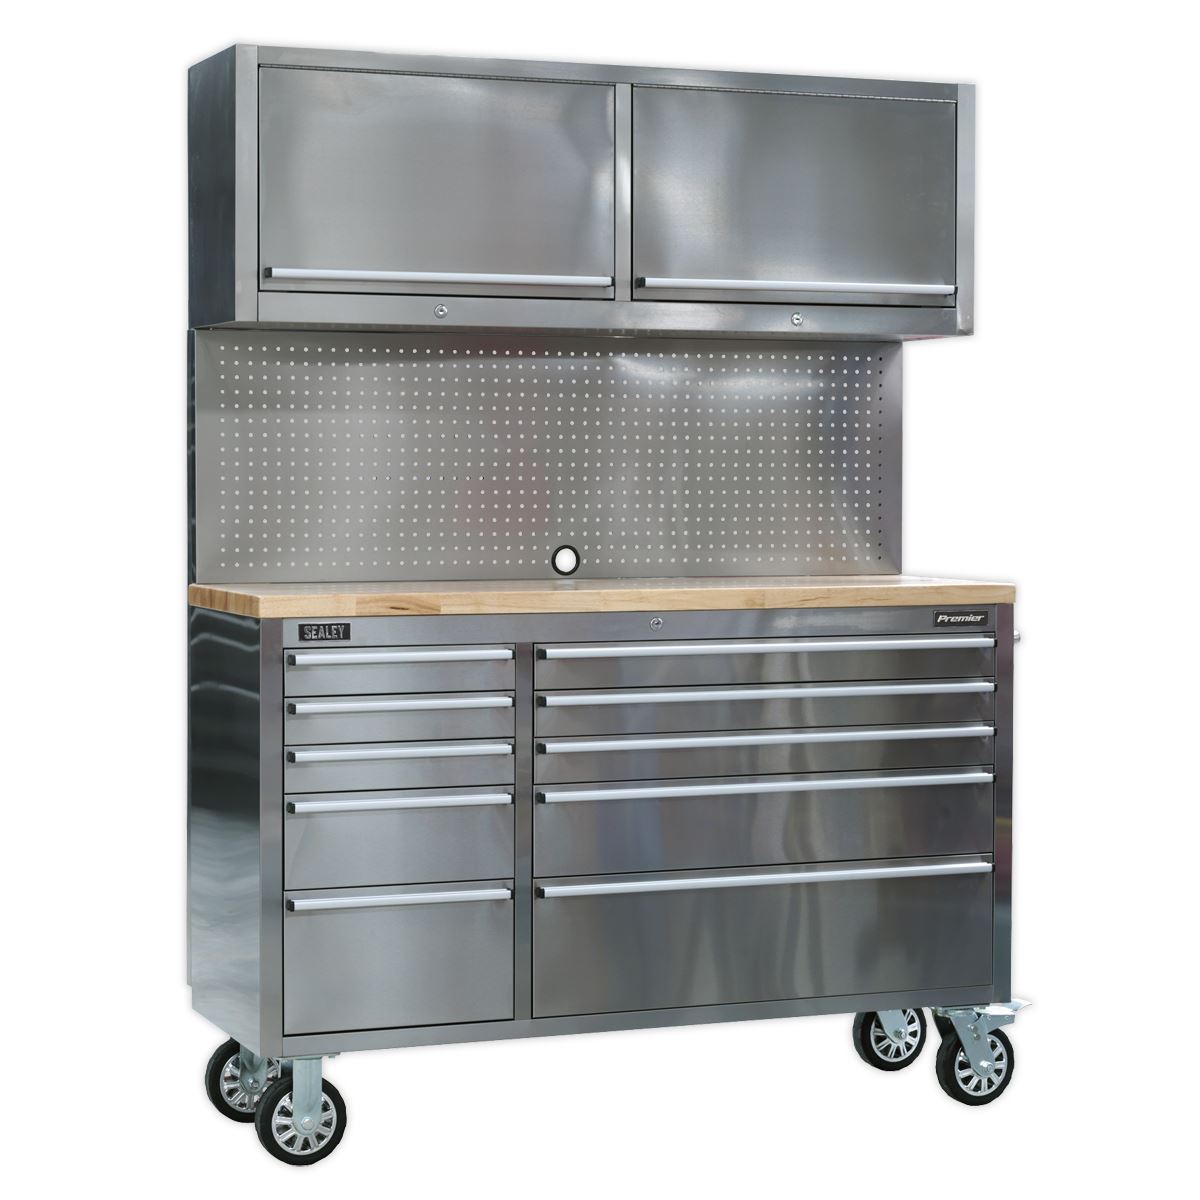 Sealey Premier Mobile Stainless Steel Tool Cabinet 10 Drawer with Backboard & 2 Wall Cupboards